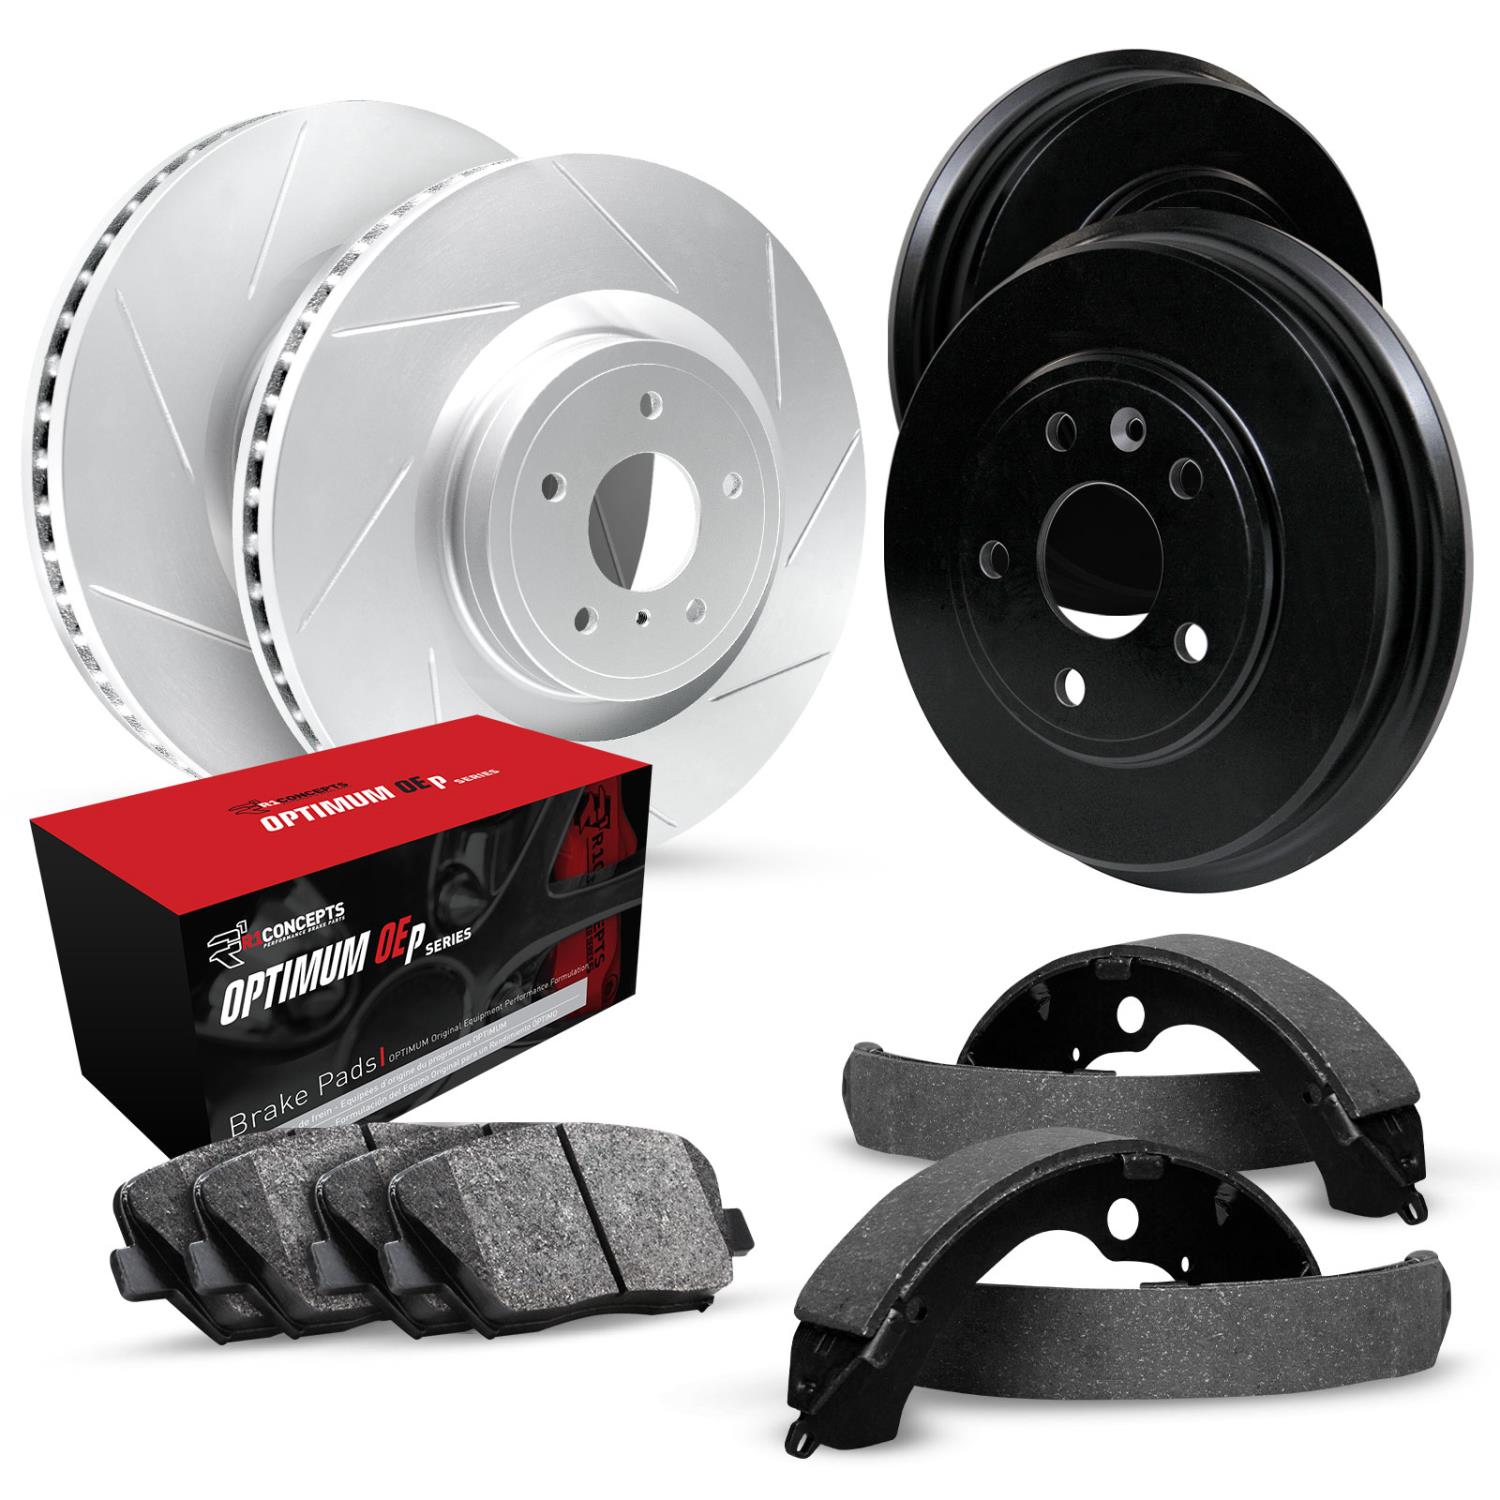 GEO-Carbon Slotted Brake Rotor & Drum Set w/Optimum OE Pads & Shoes, 2000-2004 Infiniti/Nissan, Position: Front & Rear